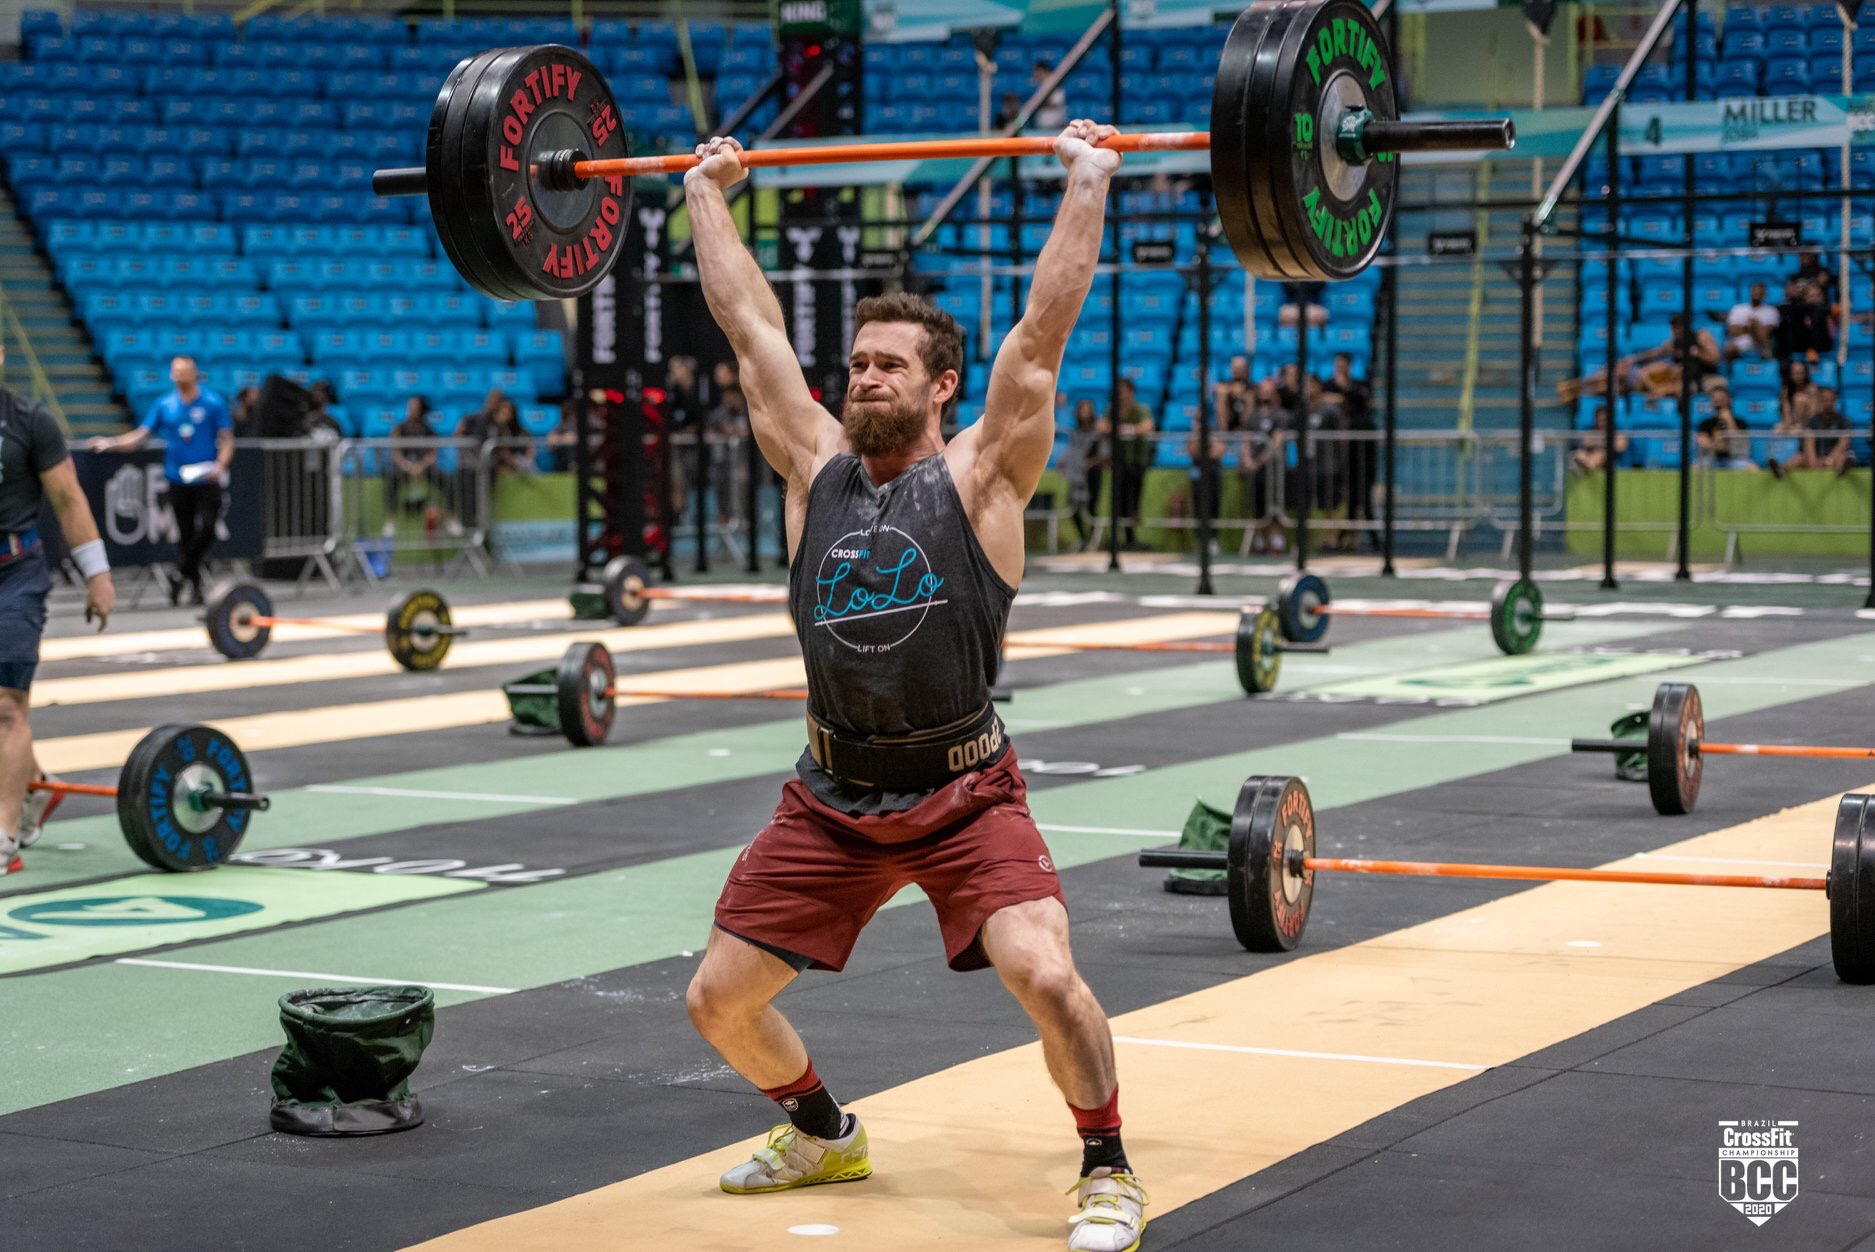 Adam Davidson wins the Brazil CrossFit Championship in Sao Paulo 2020, earning his position to compete at the 2020 CrossFit Games